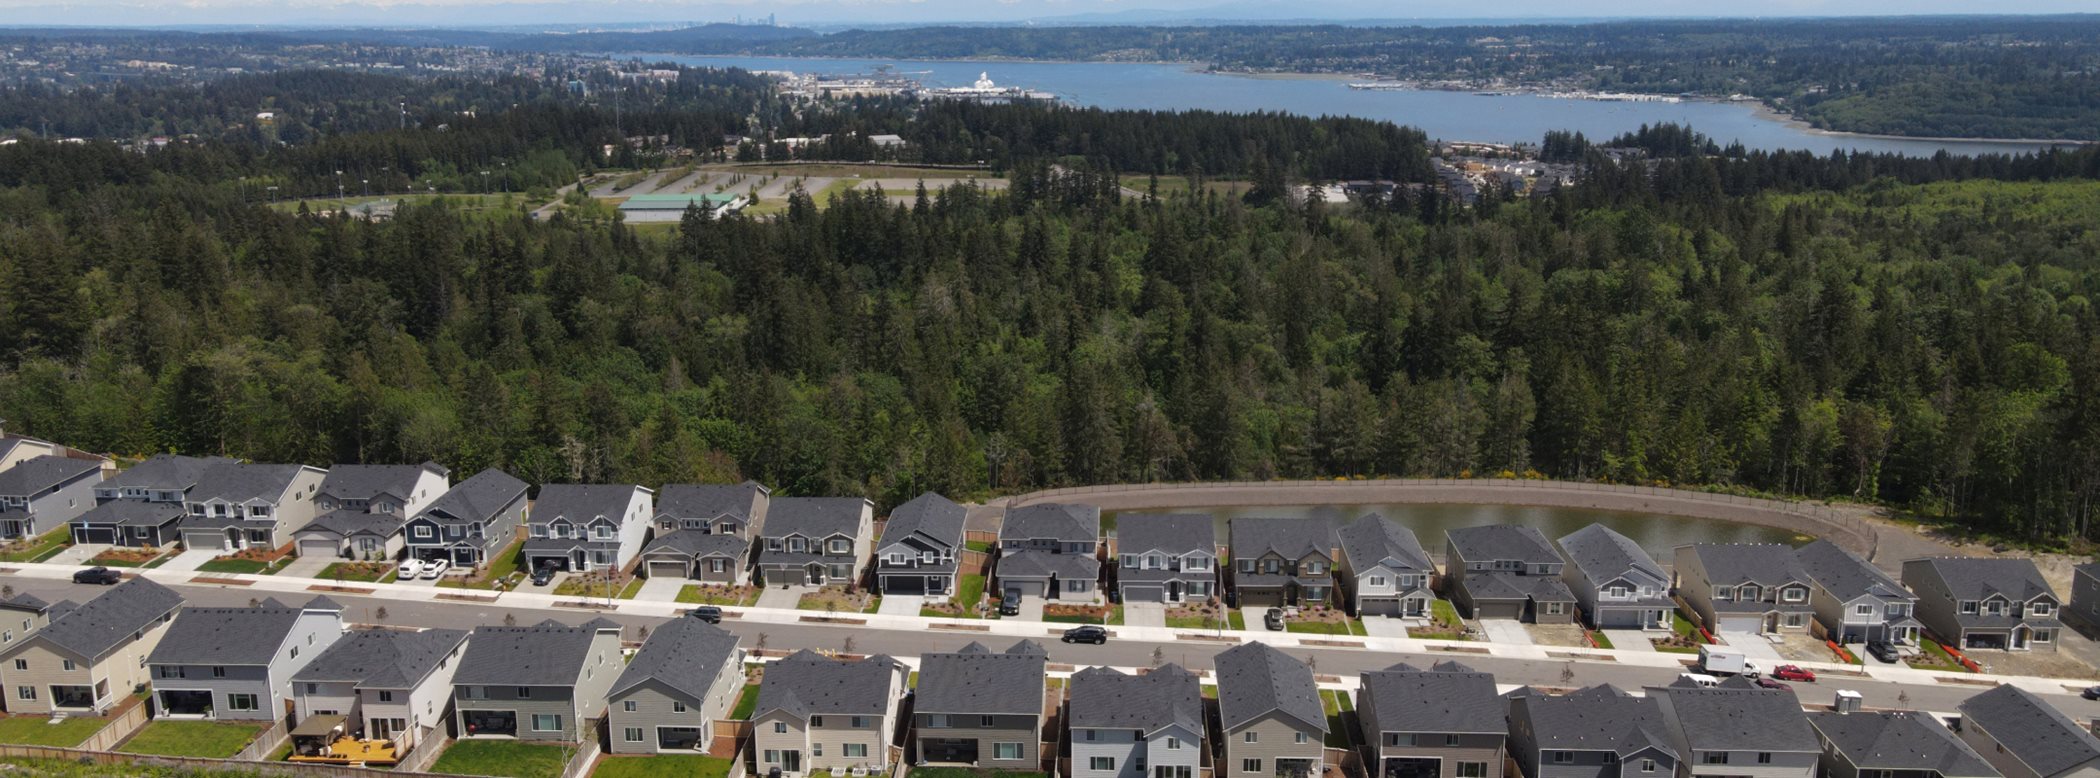 Aerial view of the community with homes and lots of trees